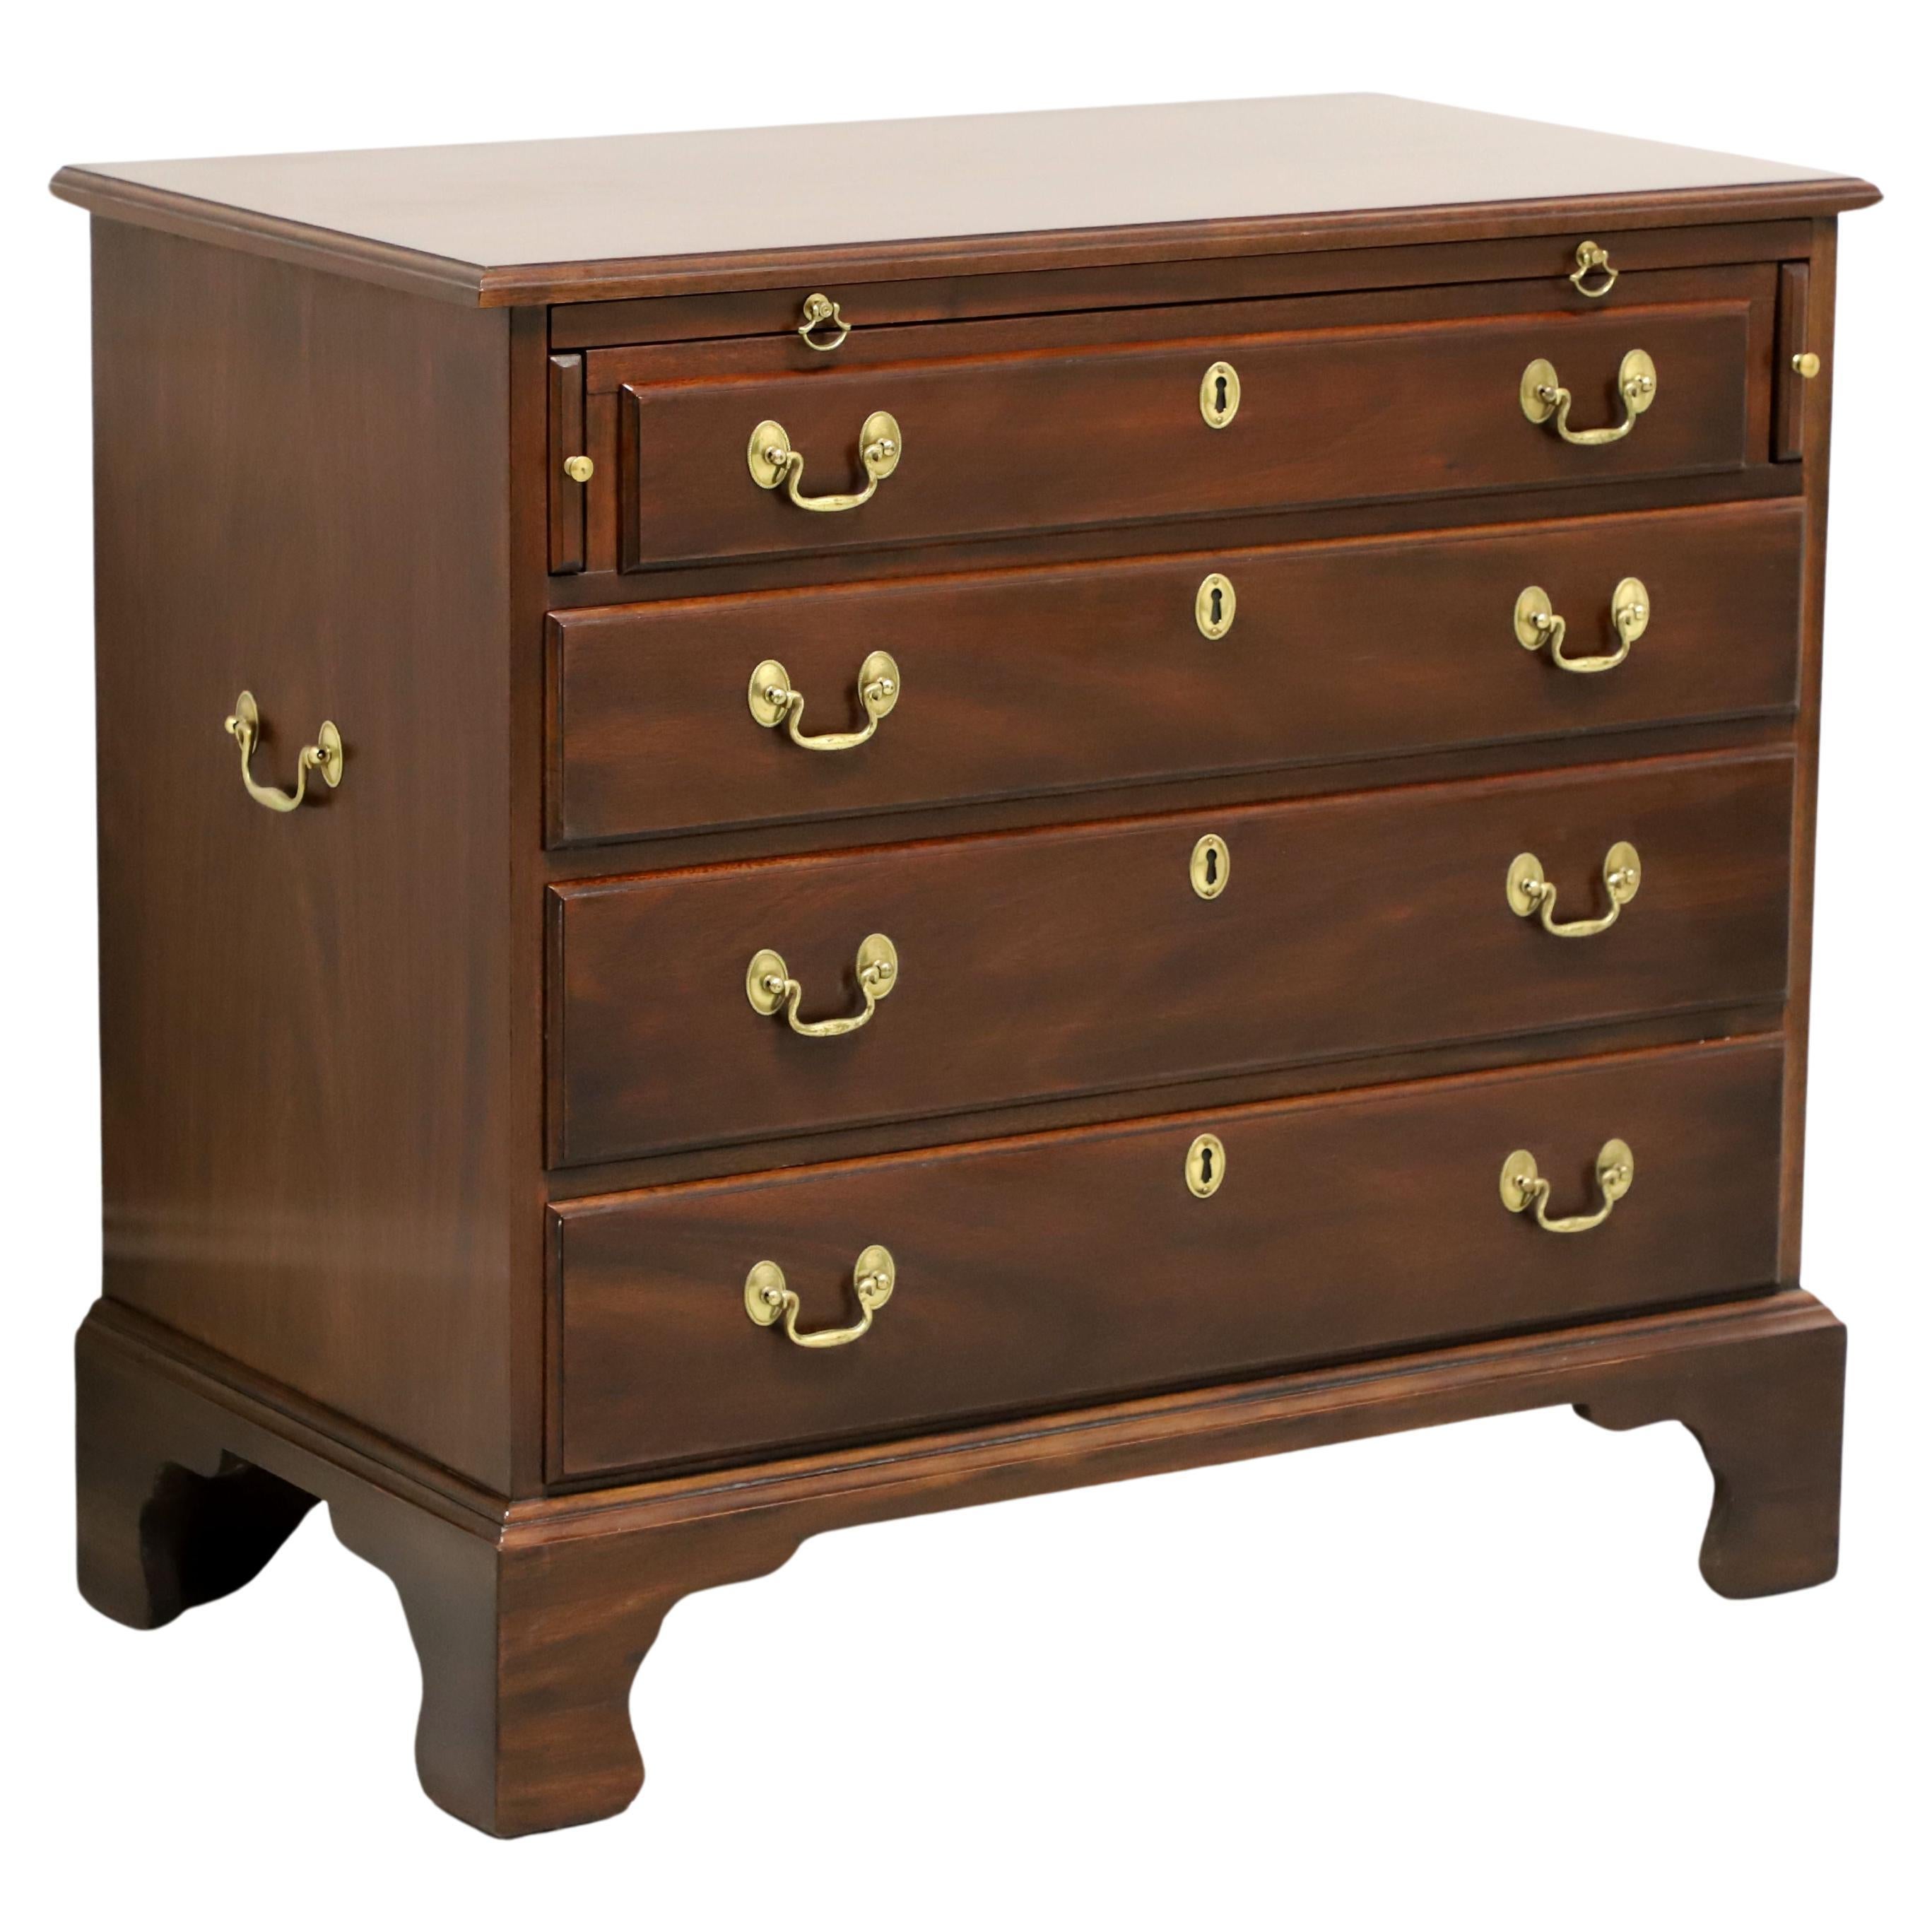 HENKEL HARRIS 2401 29 Mahogany Chippendale Serving Chest For Sale